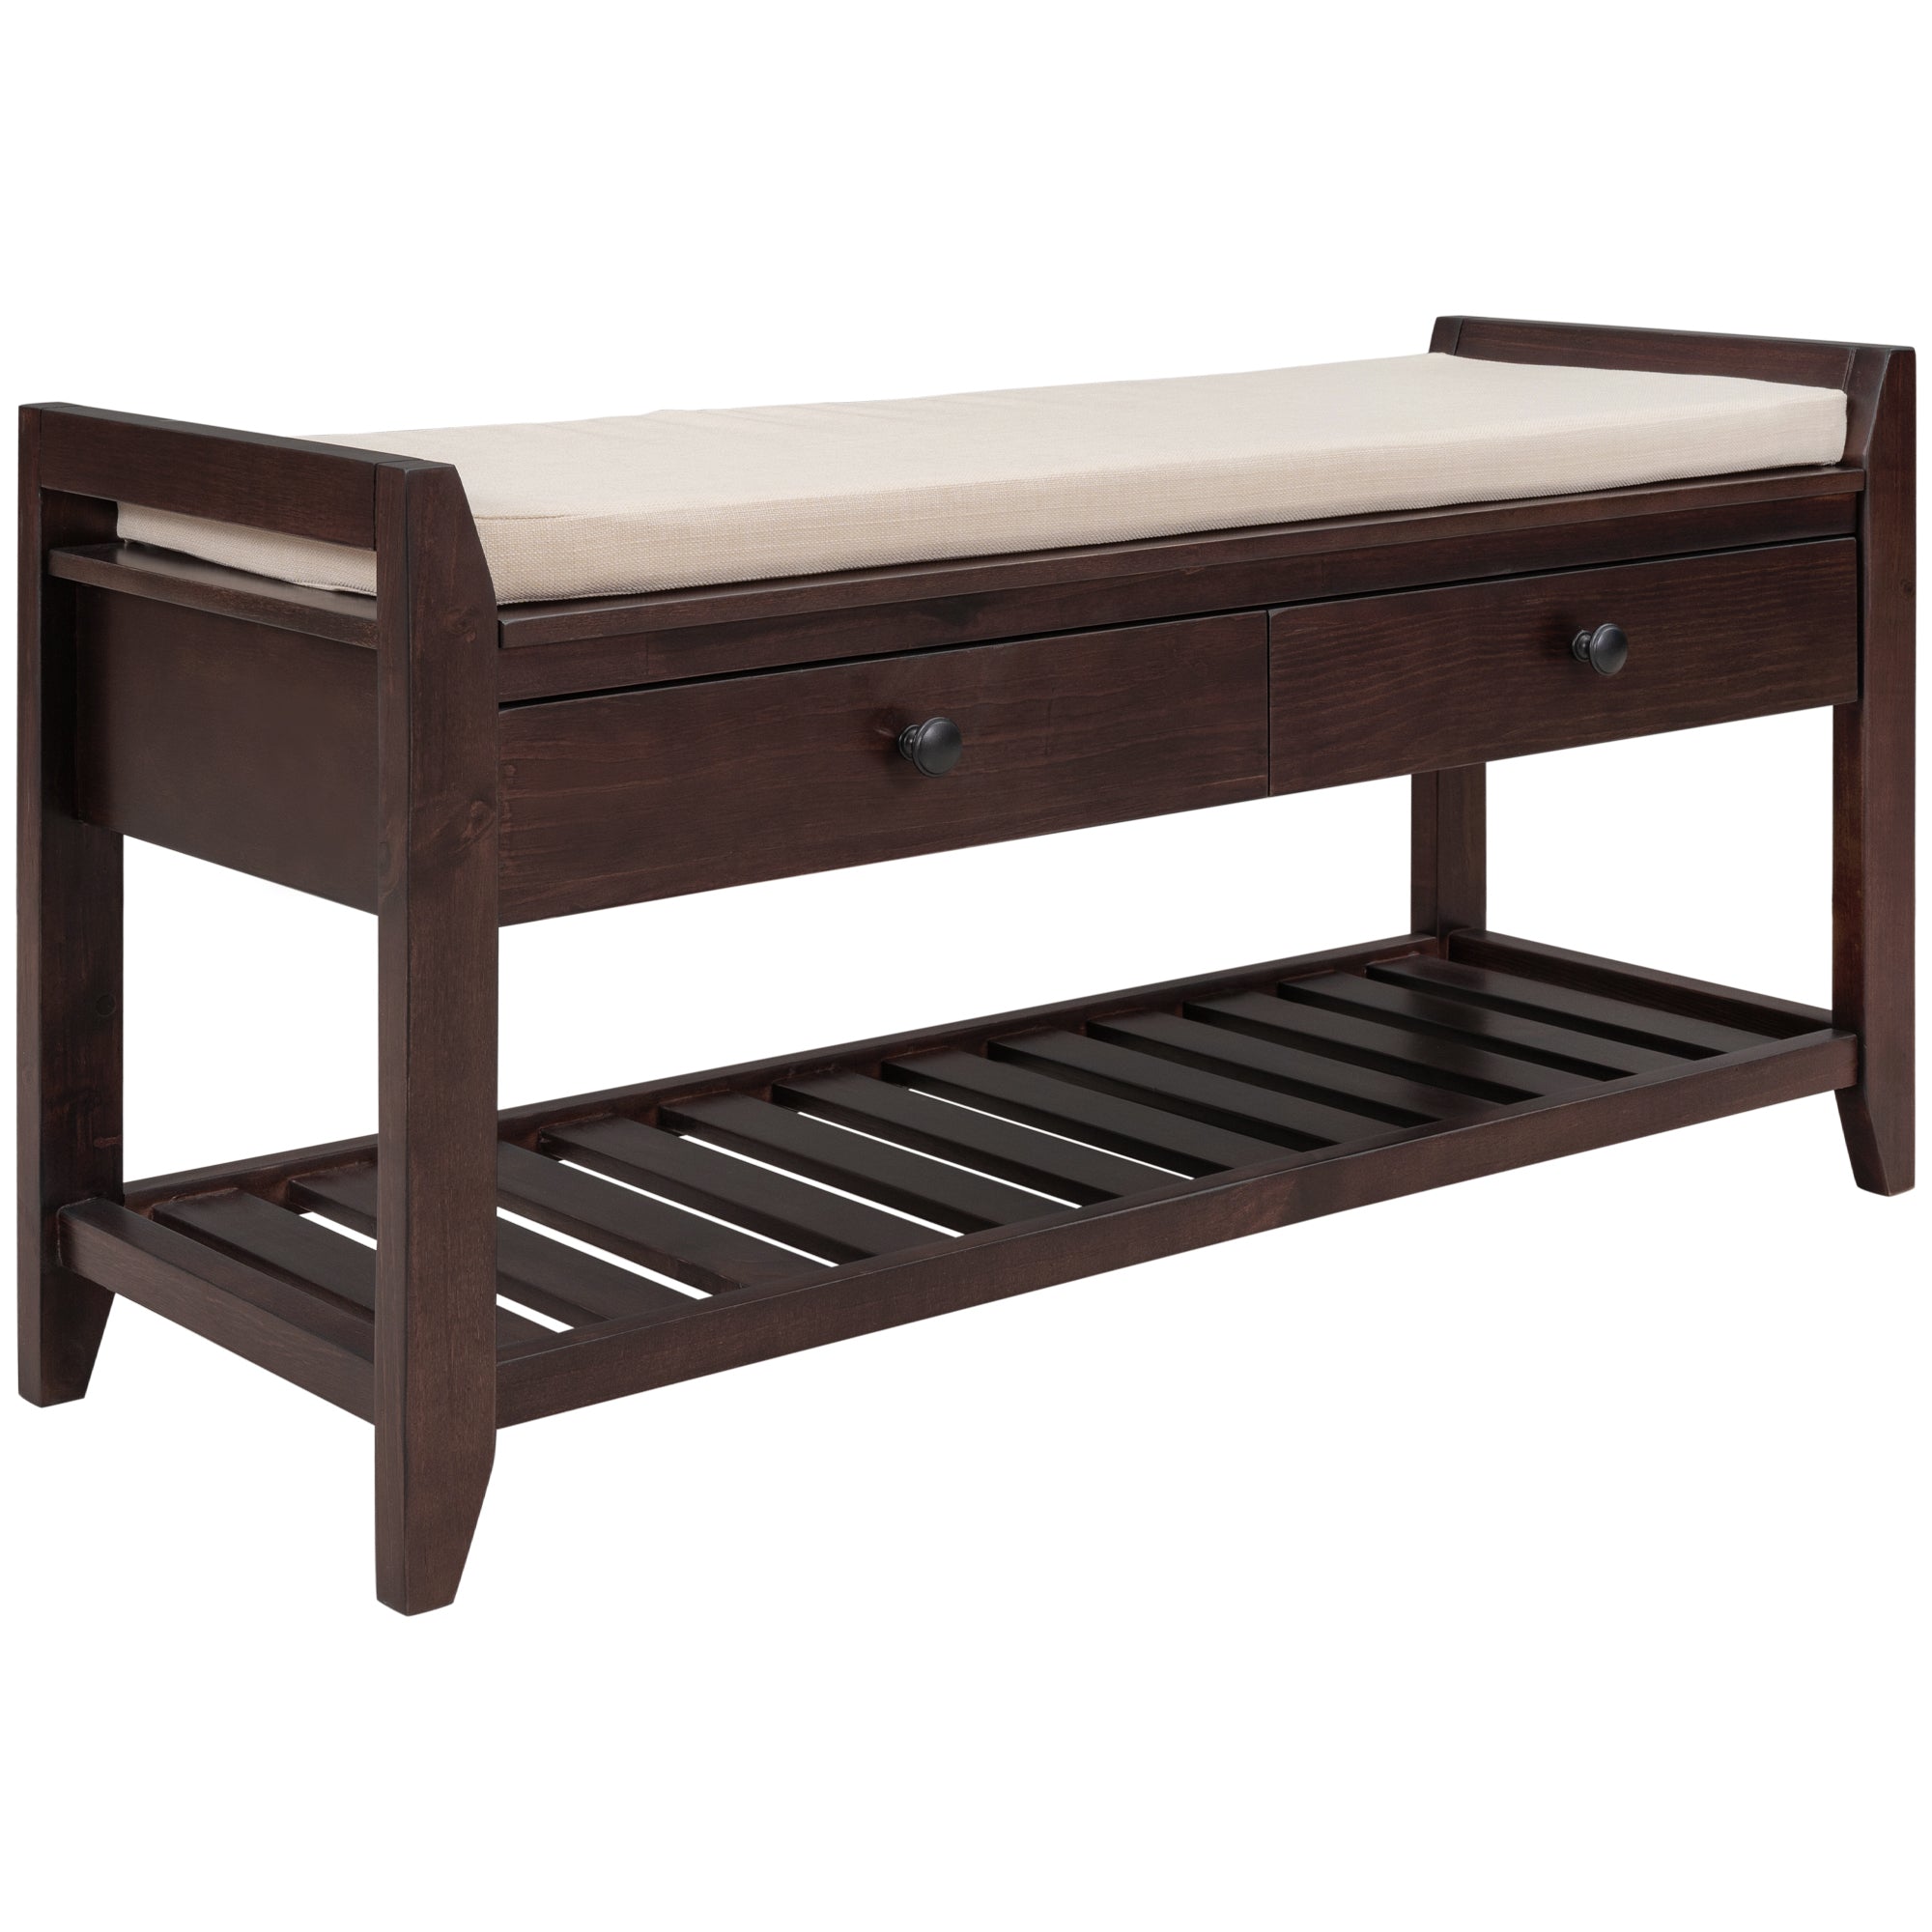 Shoe Rack with Cushioned Seat and Drawers, Multipurpose Entryway Storage Bench